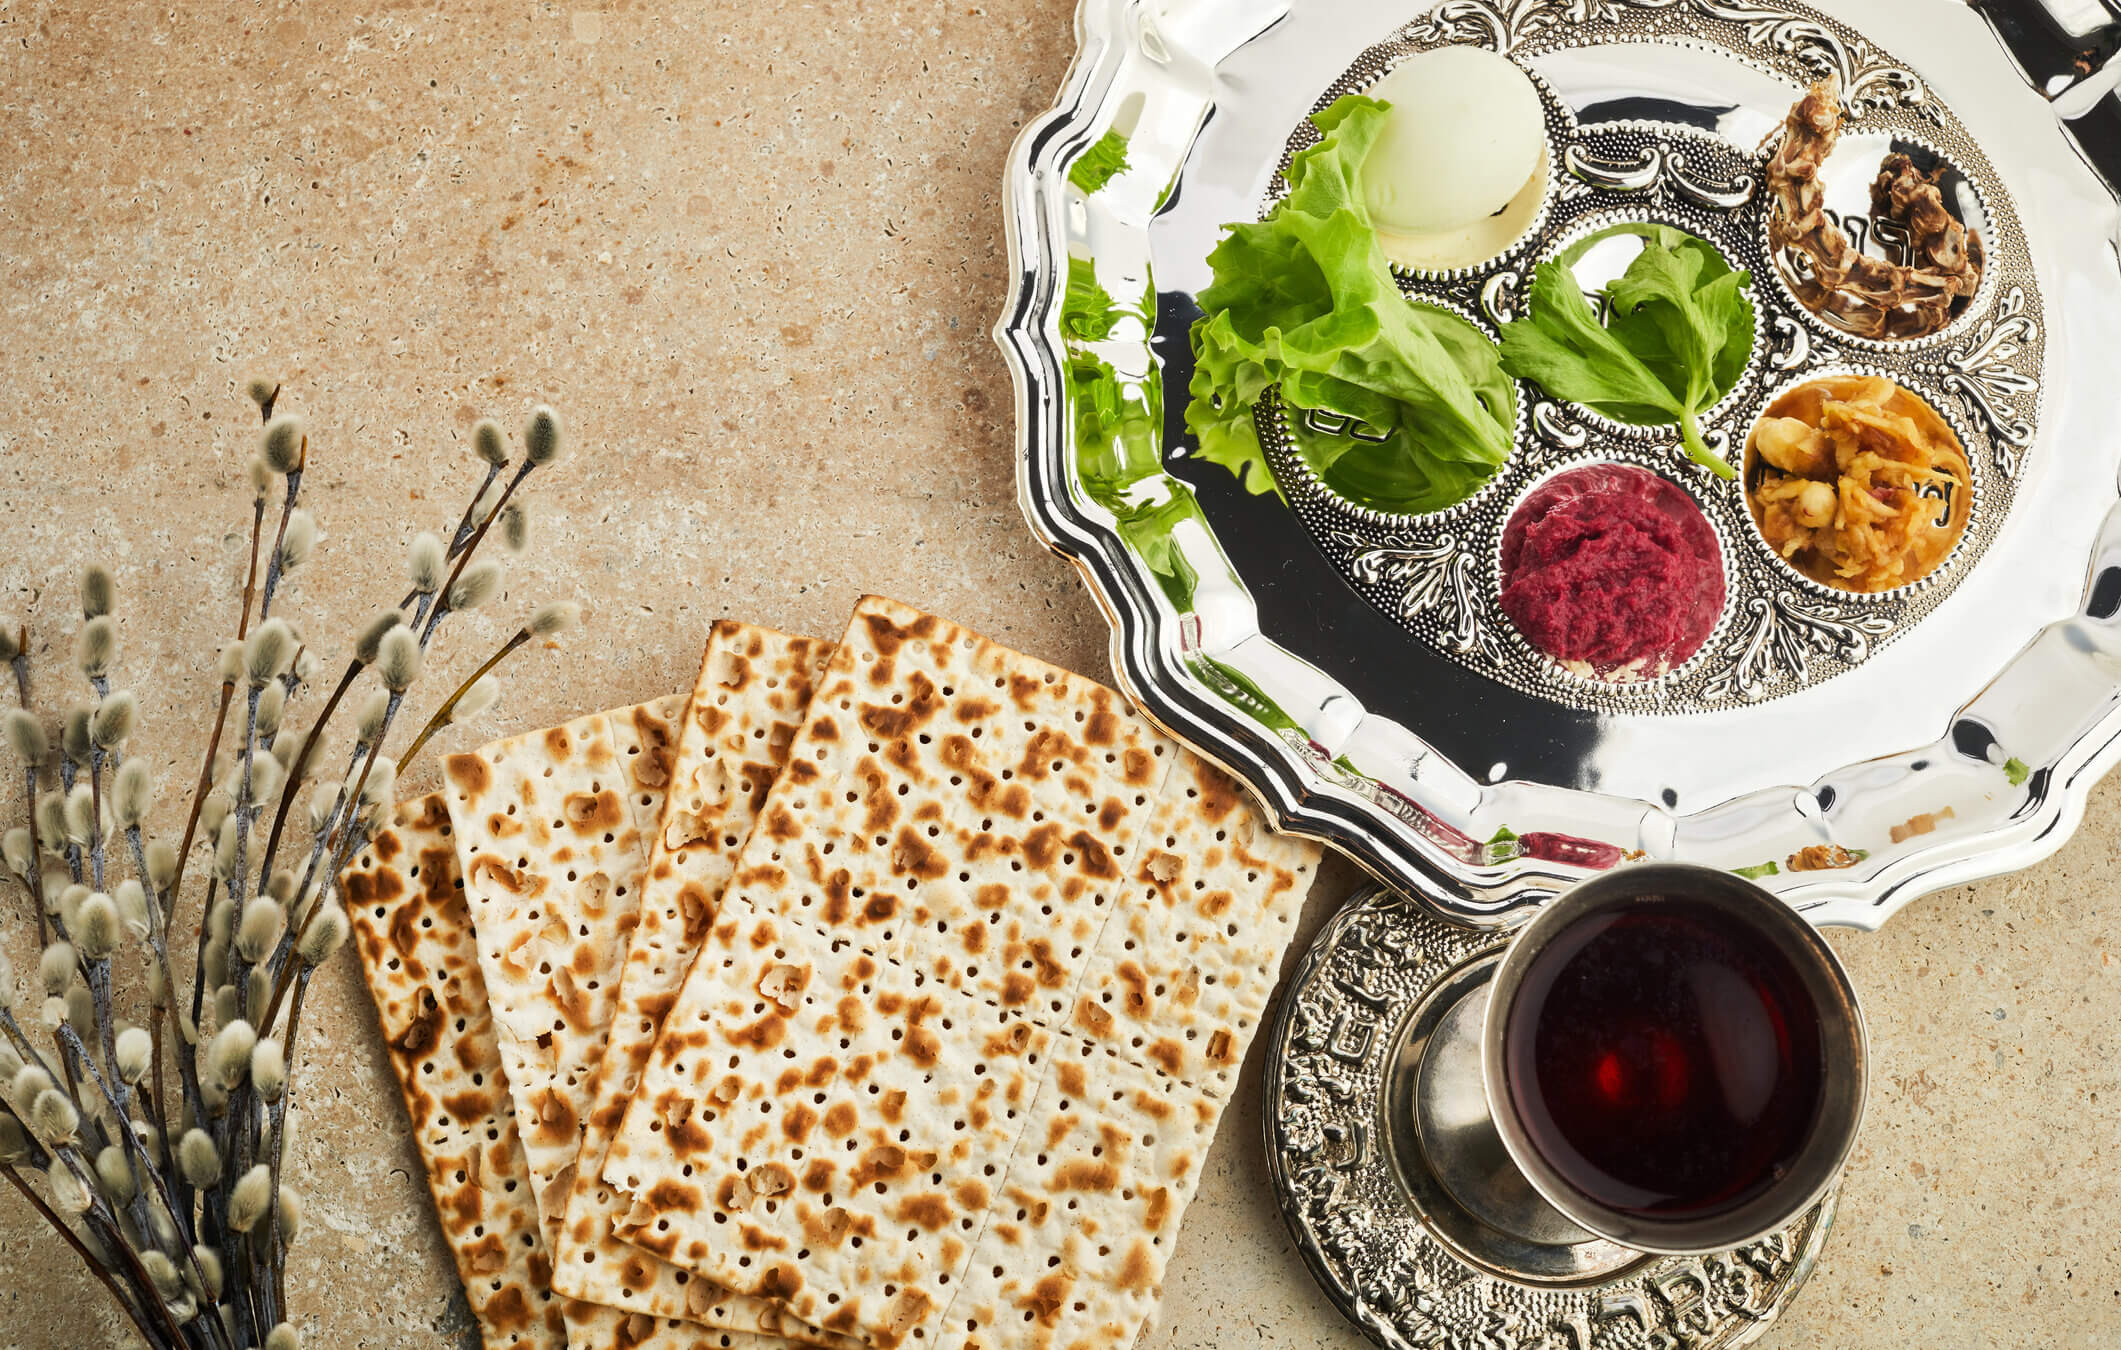 The Seder plate.